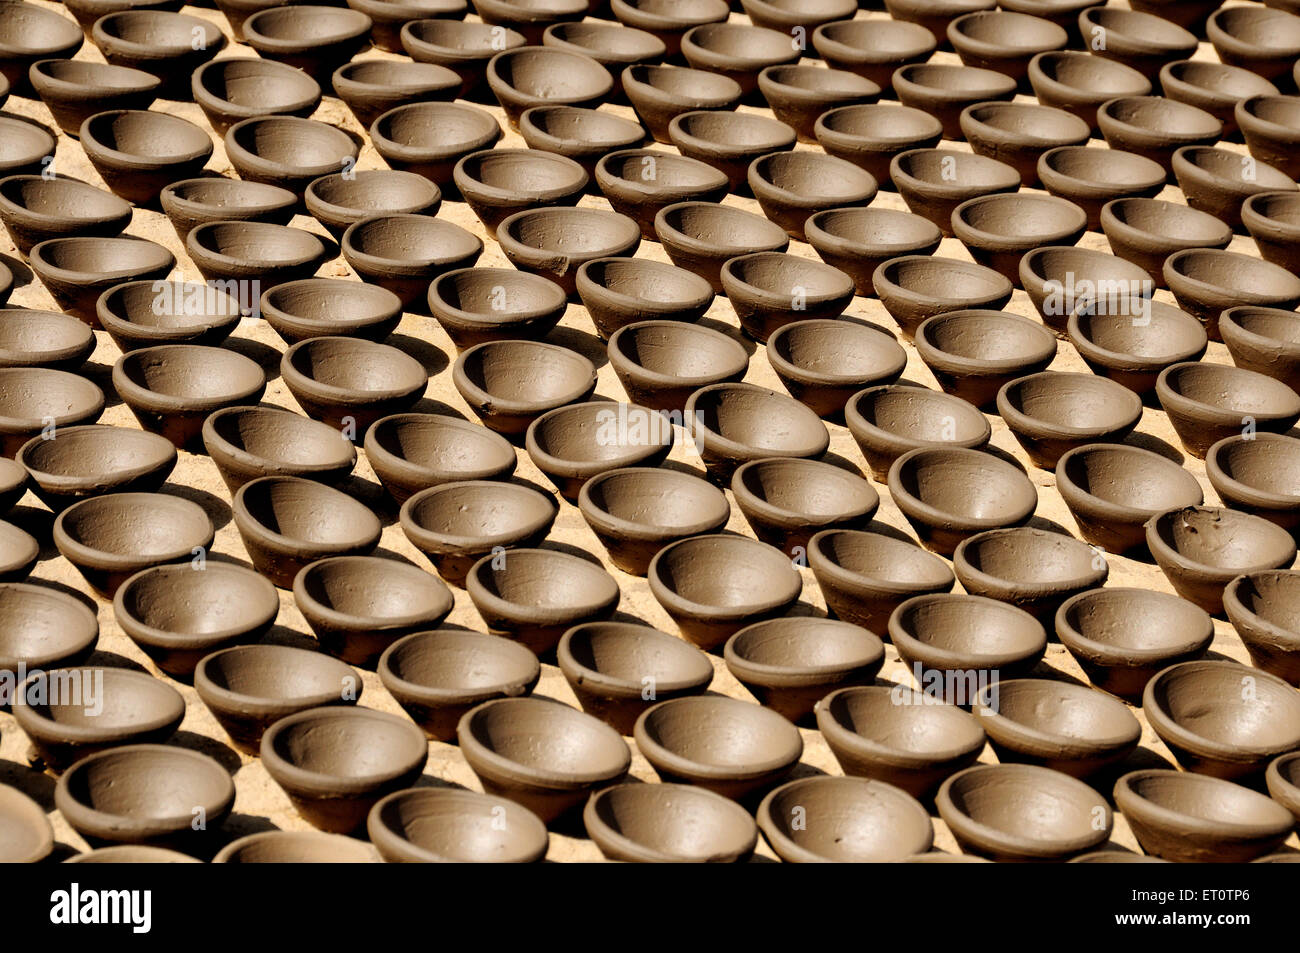 Oil lamps in a row ; Rajasthan ; India Stock Photo